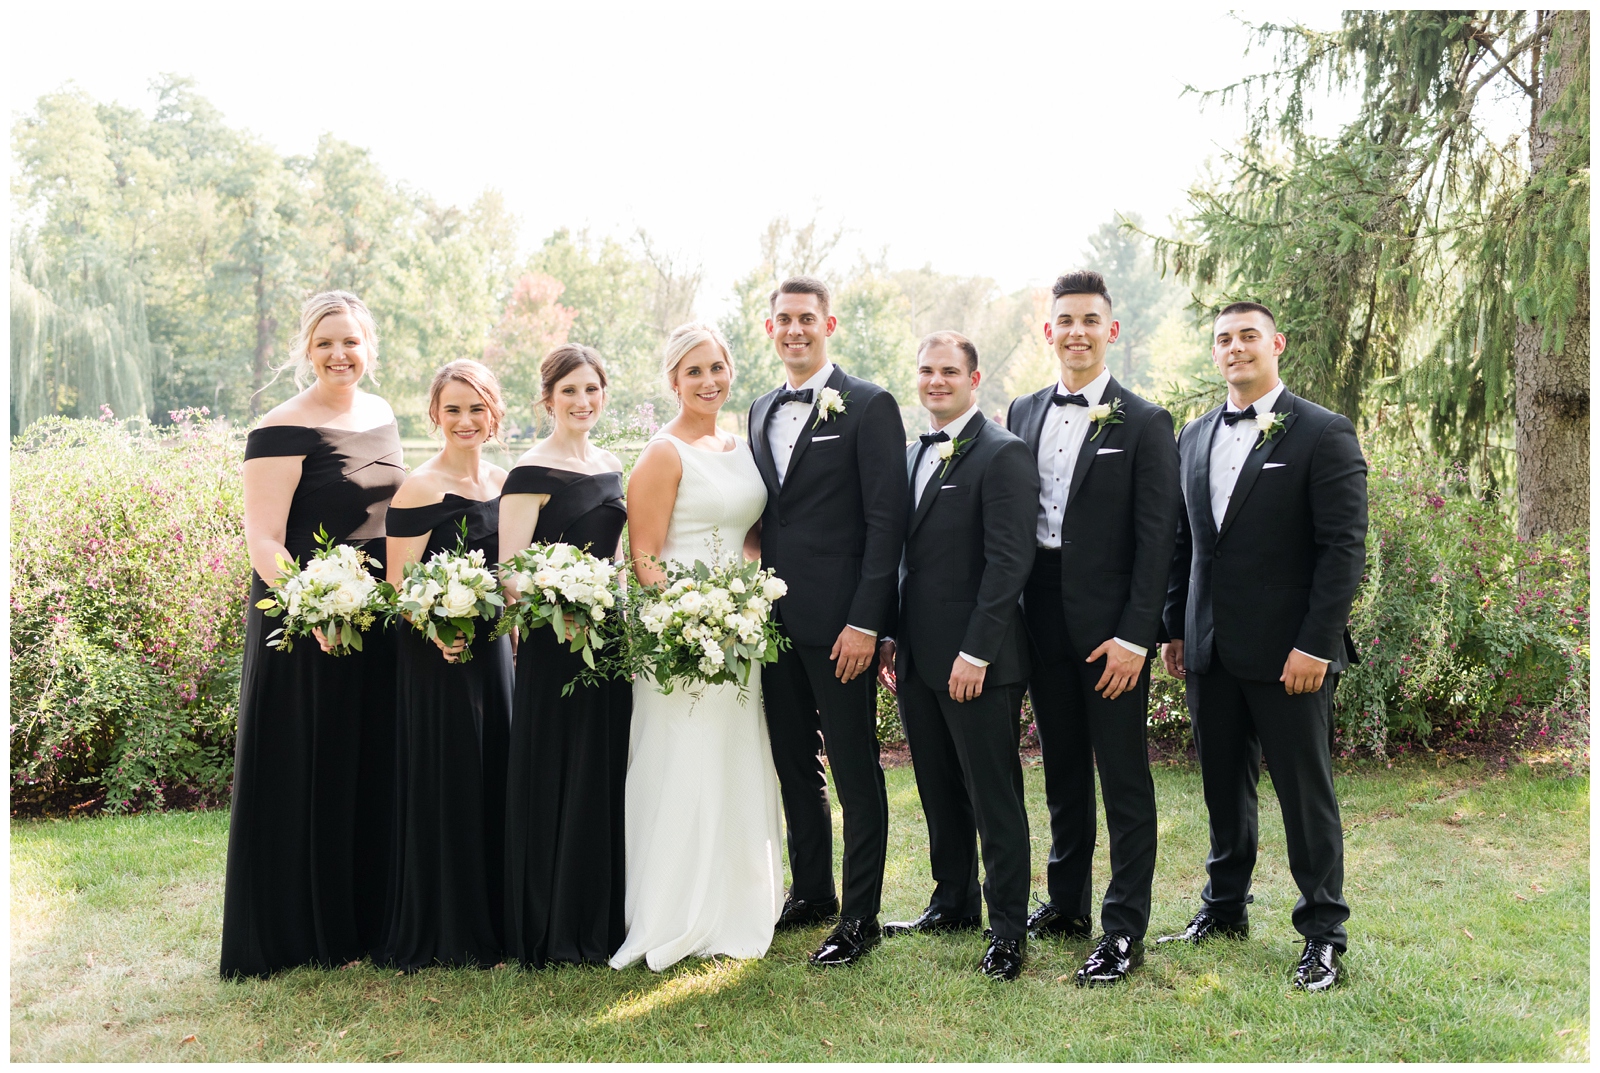 bridal party of six poses with bride and groom during elegant Italian wedding at Gervasi Vineyard